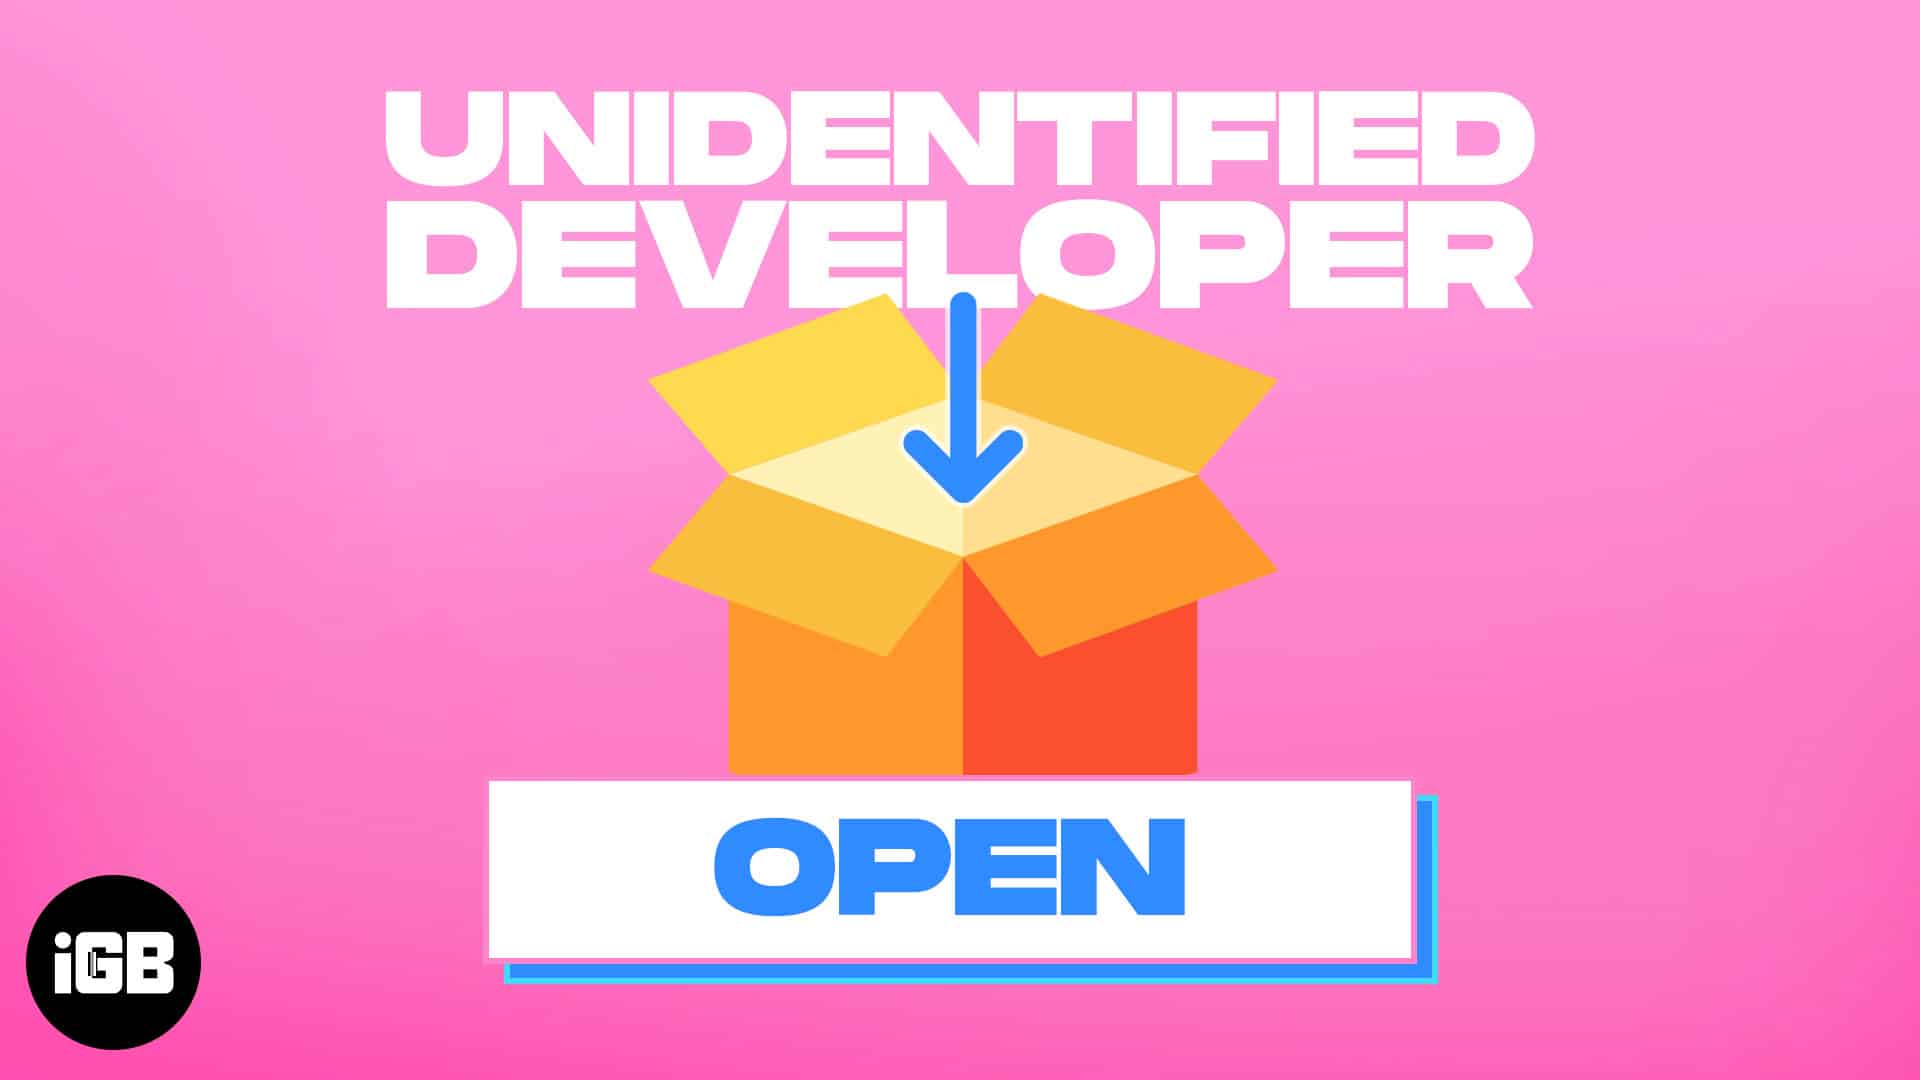 How to open an app from an unidentified developer on mac